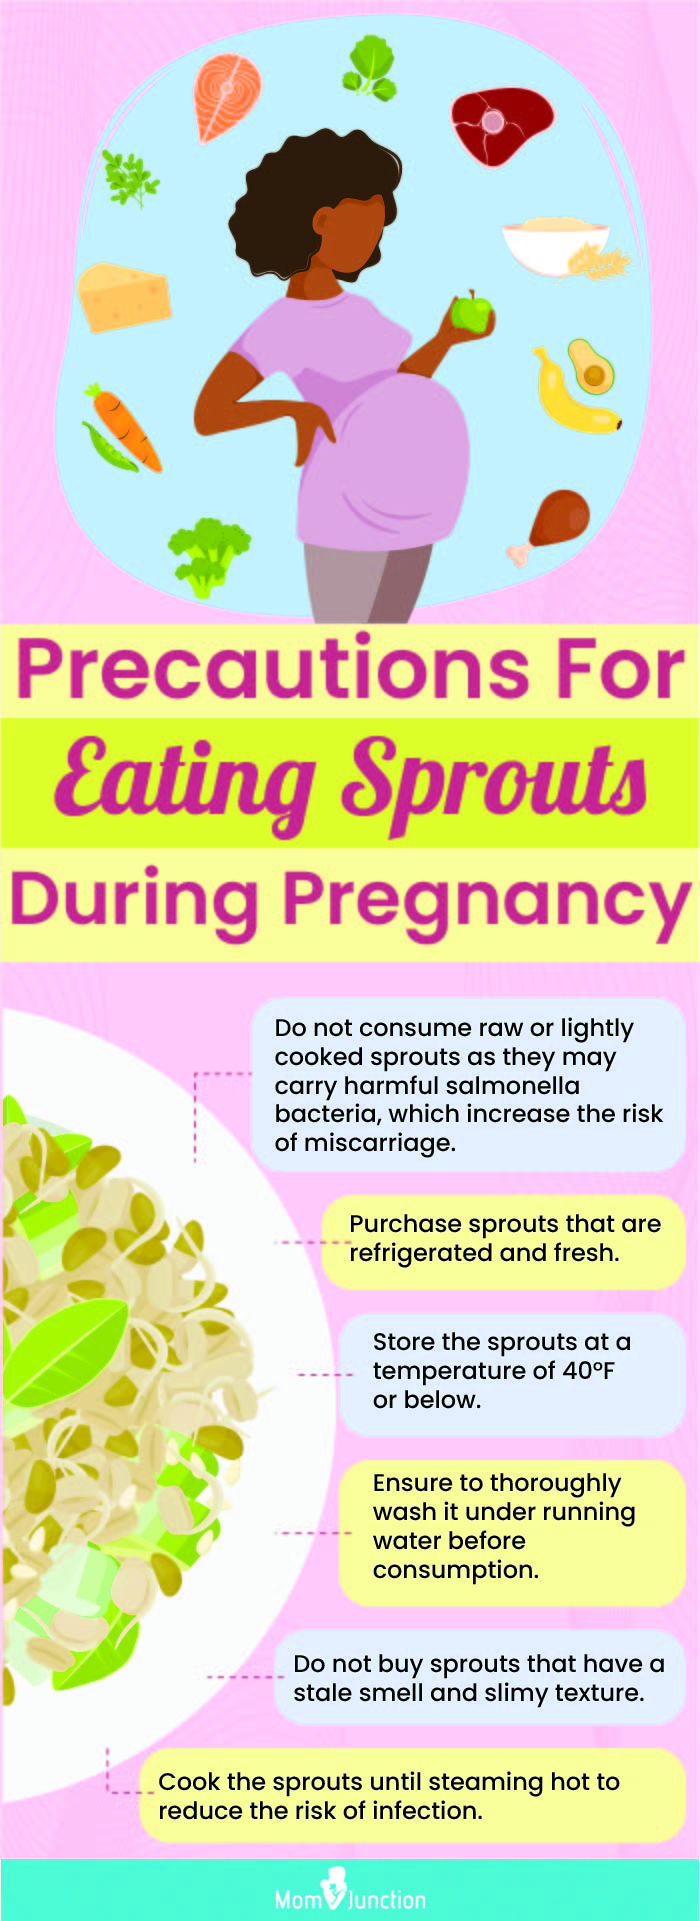 precautions for eating sprouts during pregnancy (infographic)